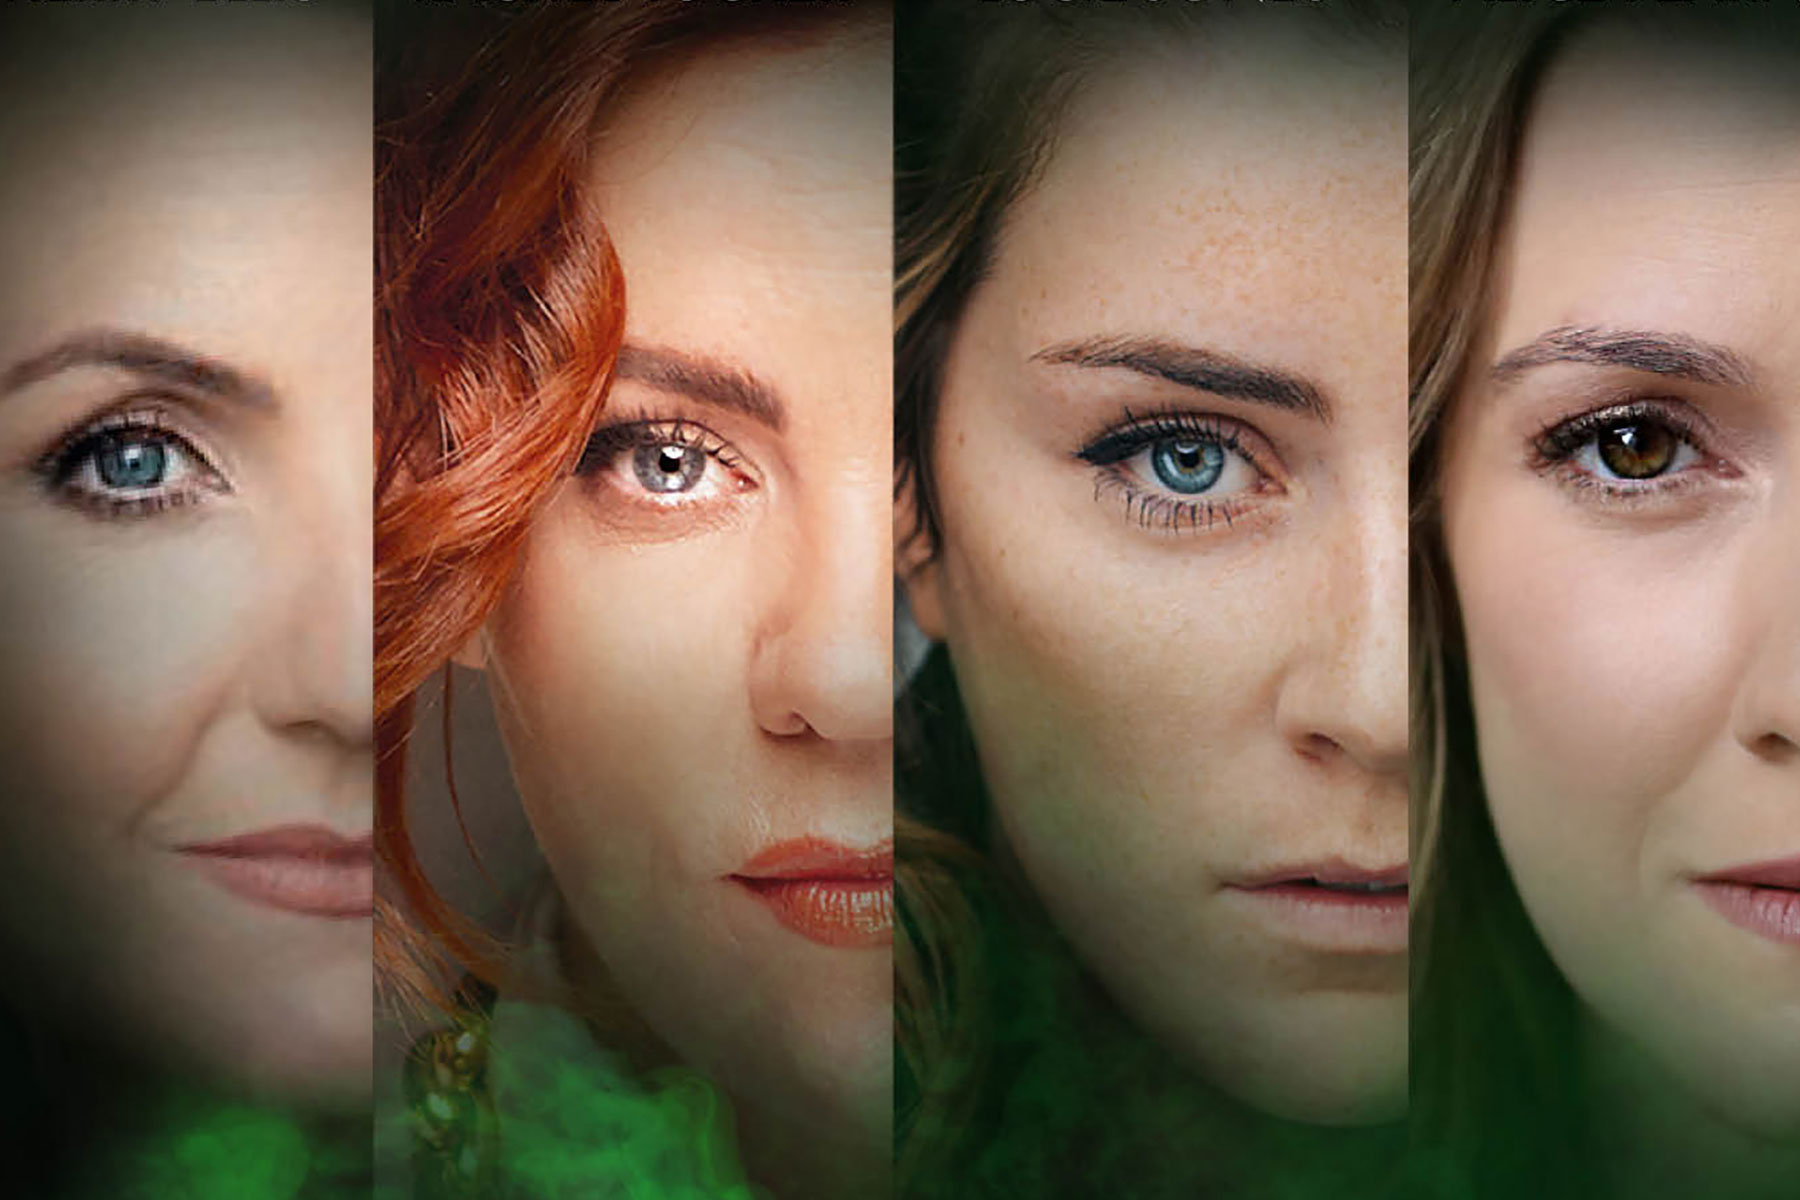 Kerry Ellis, Rachel Tucker, Lucie Jones and Alice Fearn on the cover for Defying Gravity